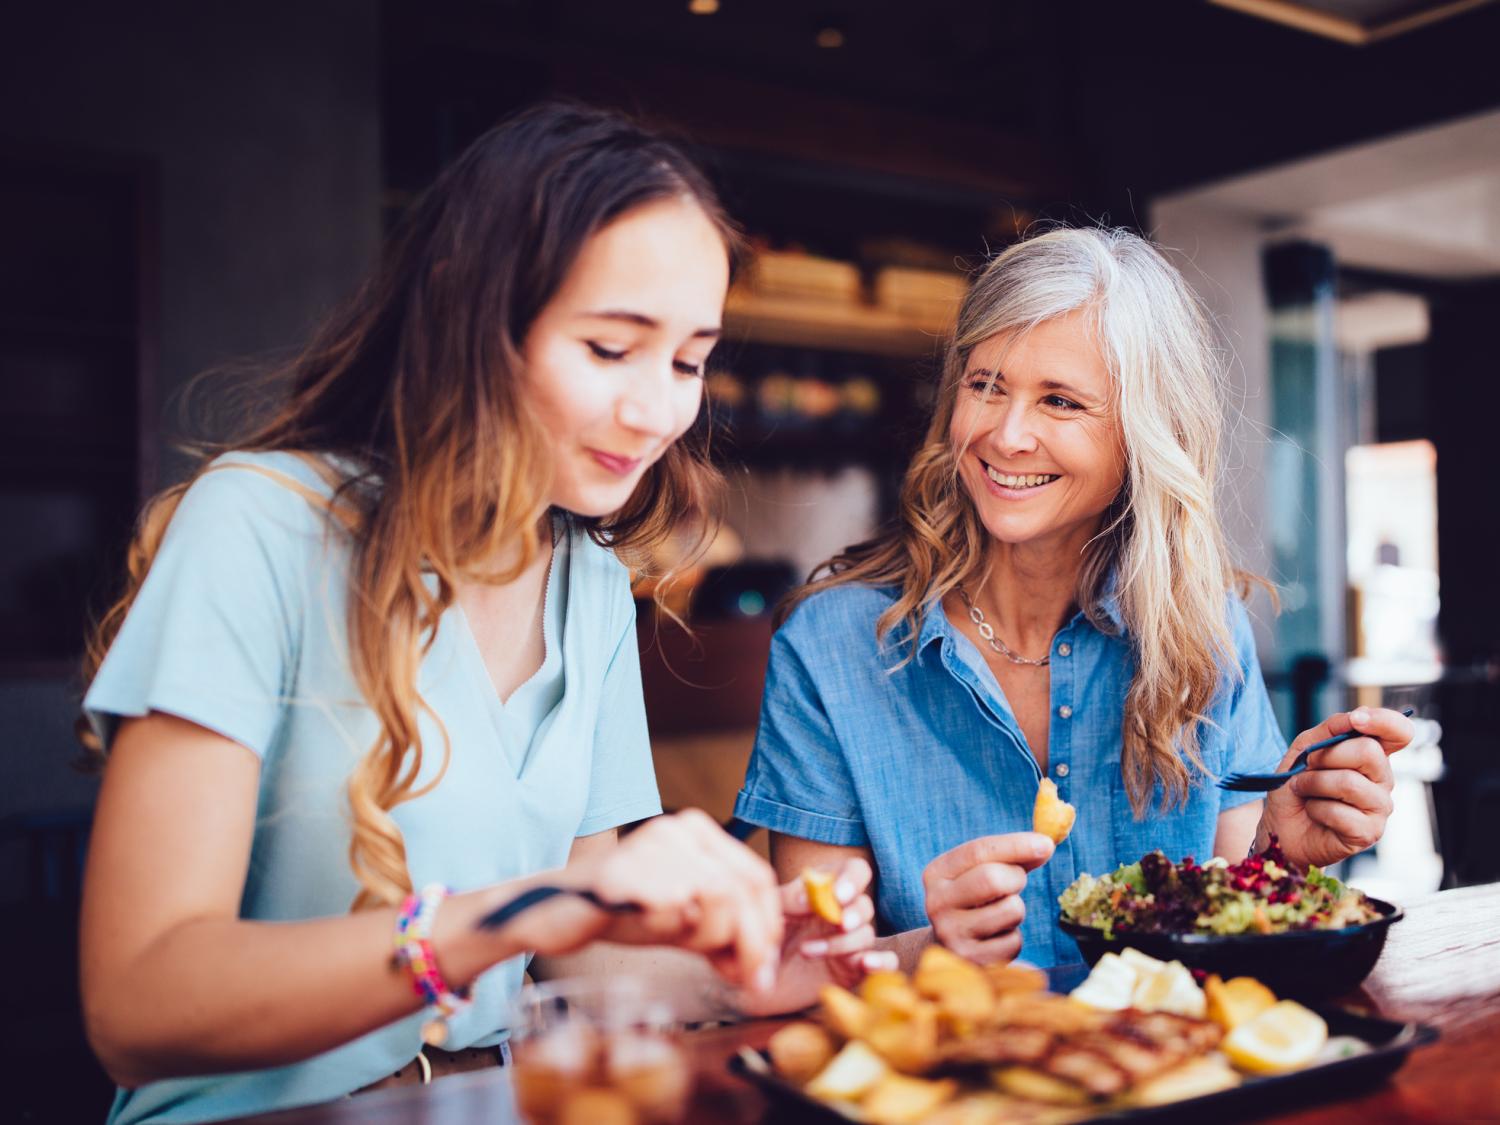 older woman smiles at her adult daughter while they eat at a restaurant together